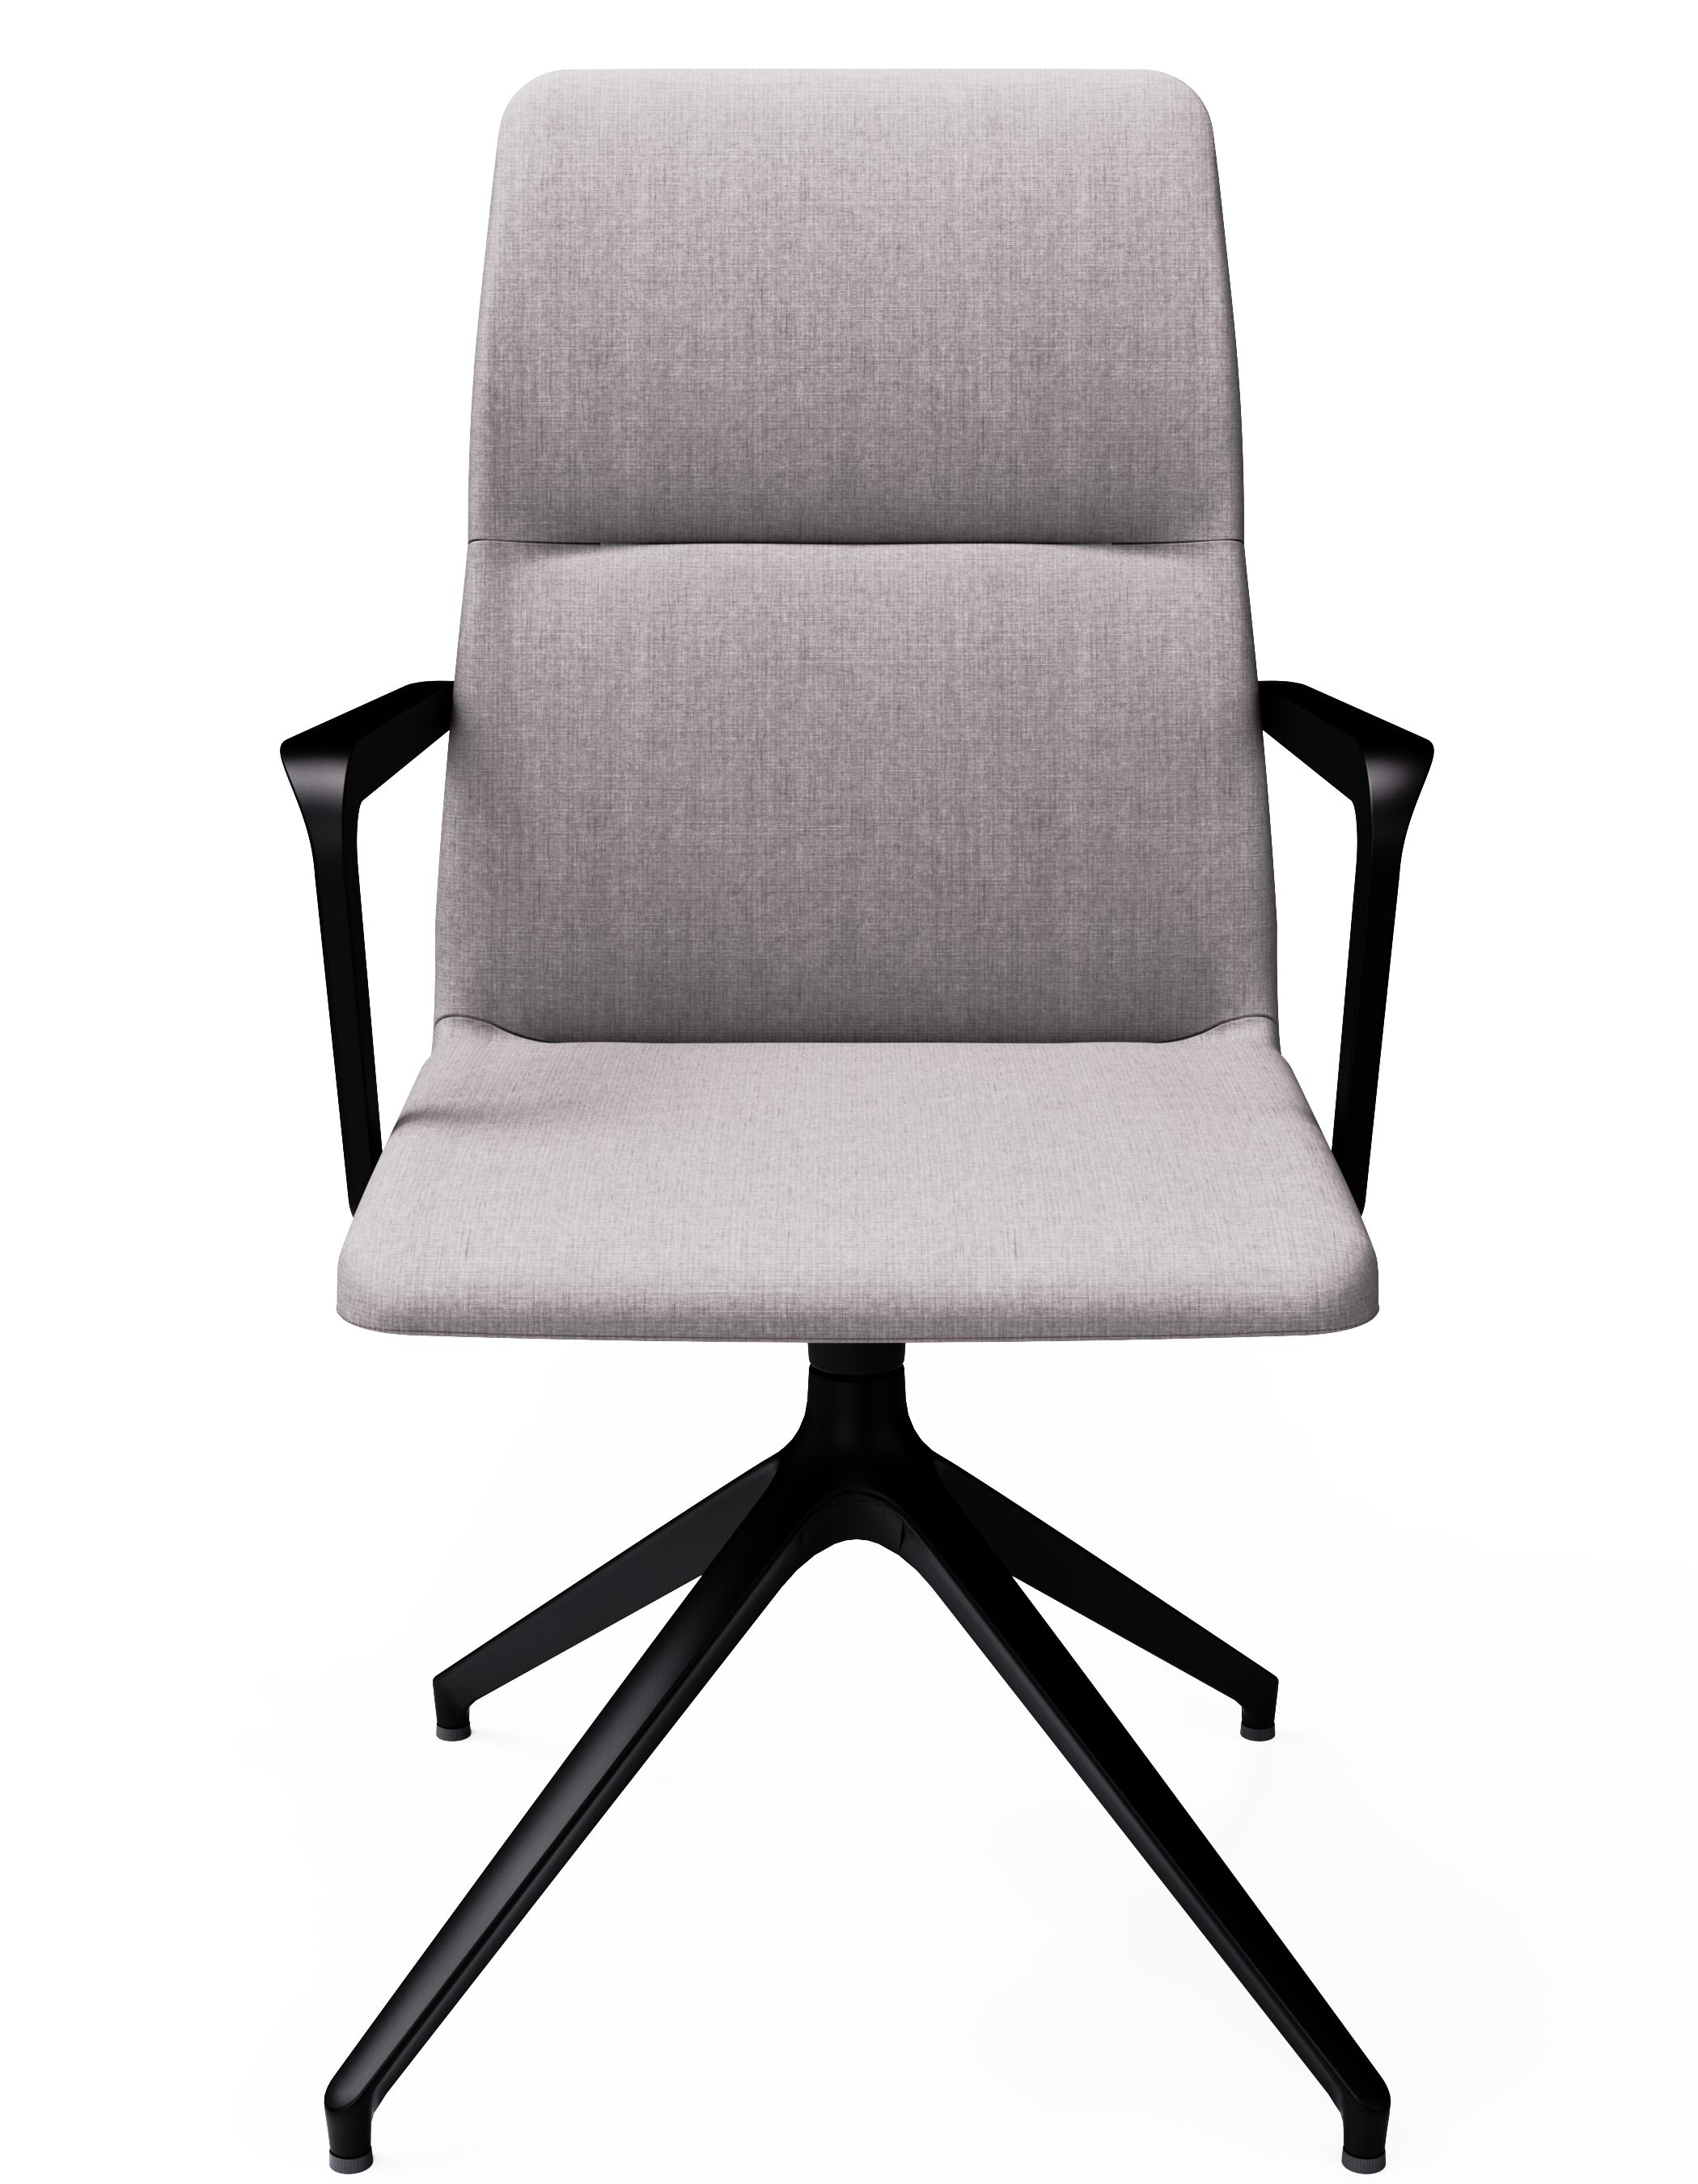 WS - Accord with arms 4 star pyramid base chair - black - remix 126 - front